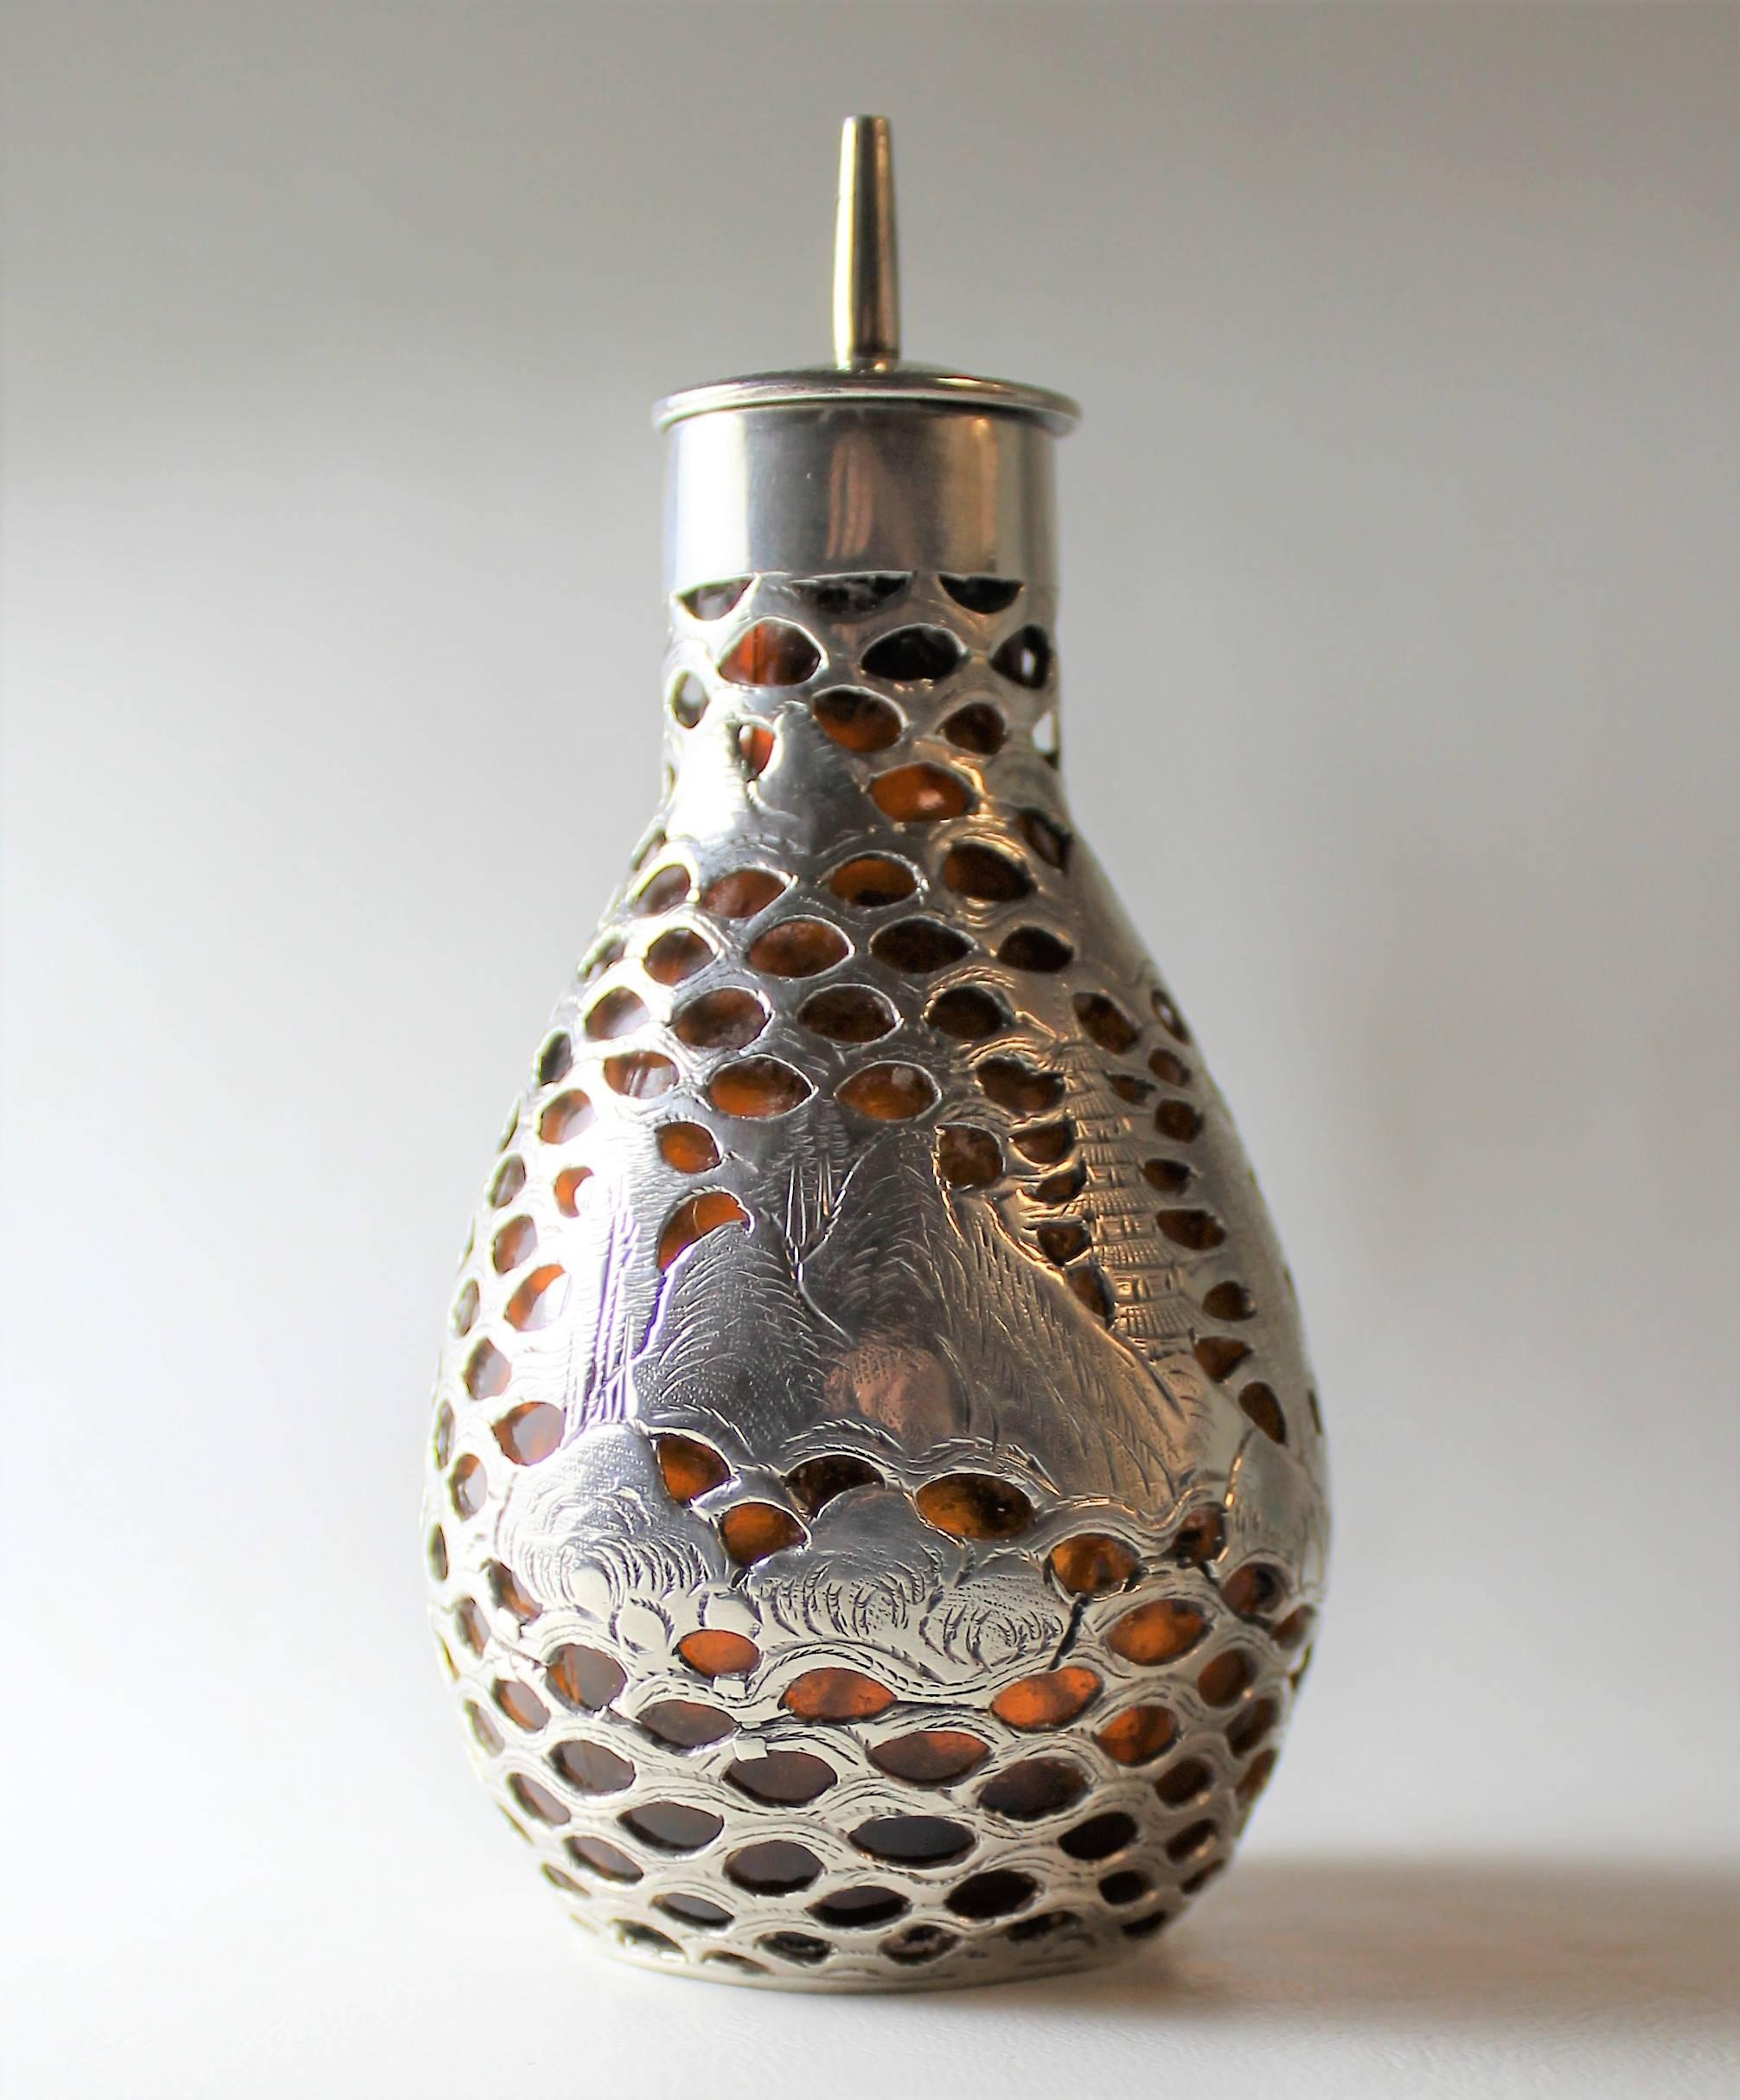 This beautifully made piece made by Wai Kee of Hong Kong consists of a Fine pierced solid silver cage surrounding an amber colored glass bottle. Both the silver and glass are marked as shown. The silver cage features an intricately hand chased